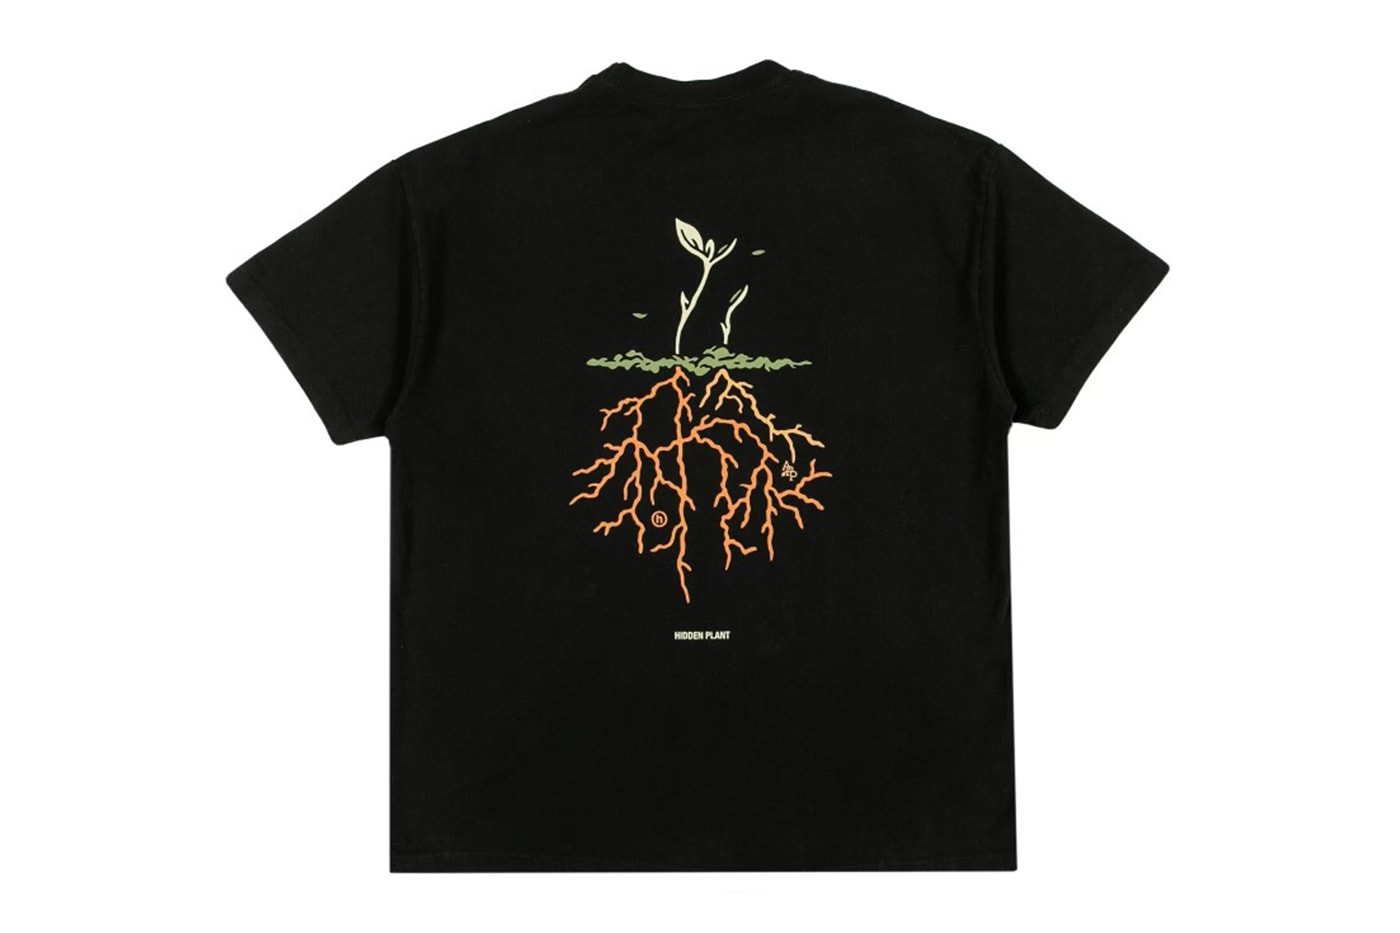 hidden ny aplasticplant t shirts release info Date Buy Price 